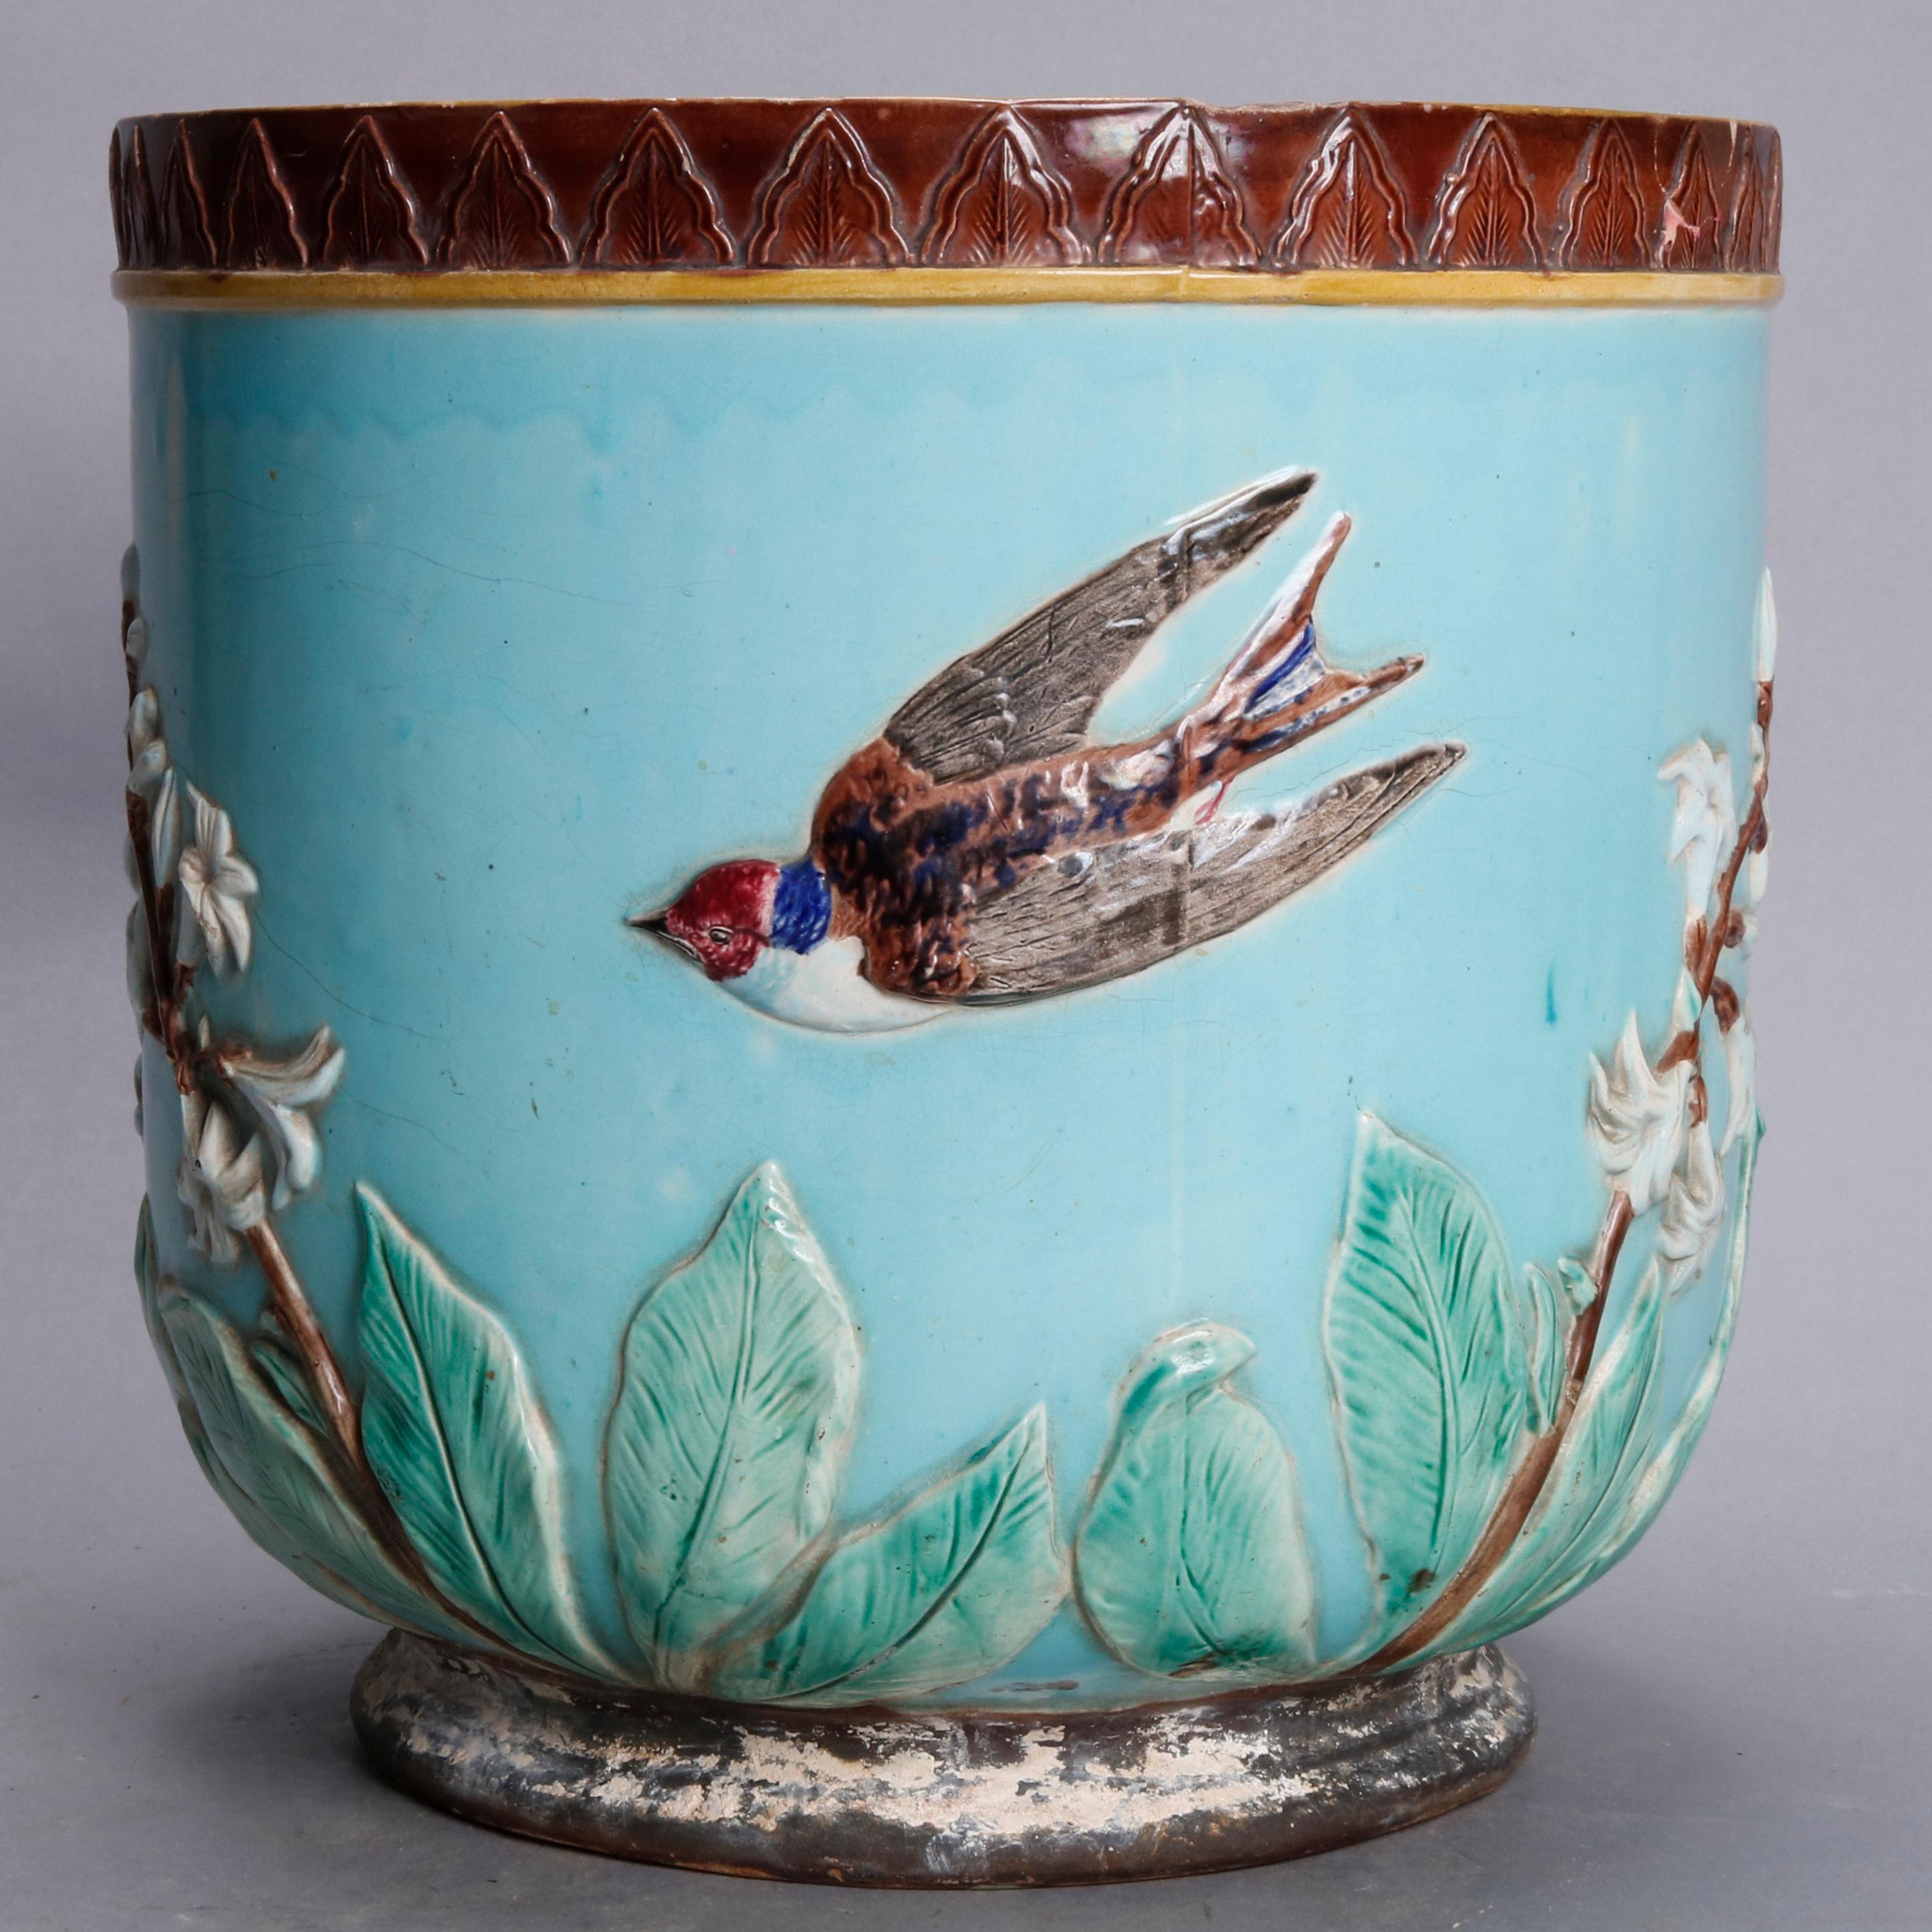 An antique English Aesthetic Movement Wedgwood Majolica pottery oversized jardinière offers garden or marsh scene with swallows (birds) in flight on turquoise ground, circa 1870.

Measures: 12.5